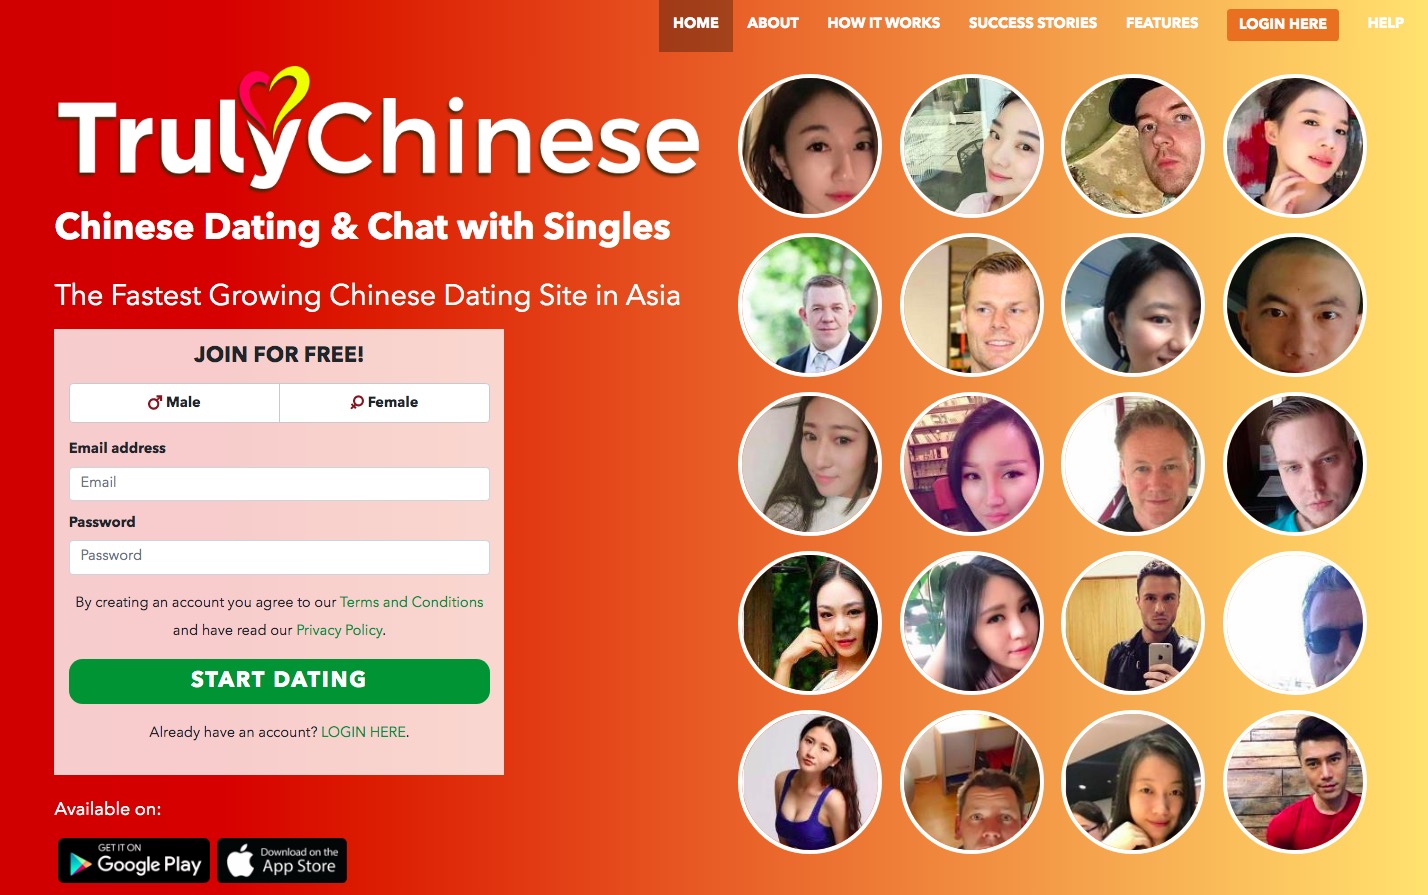 TrulyChinese main page